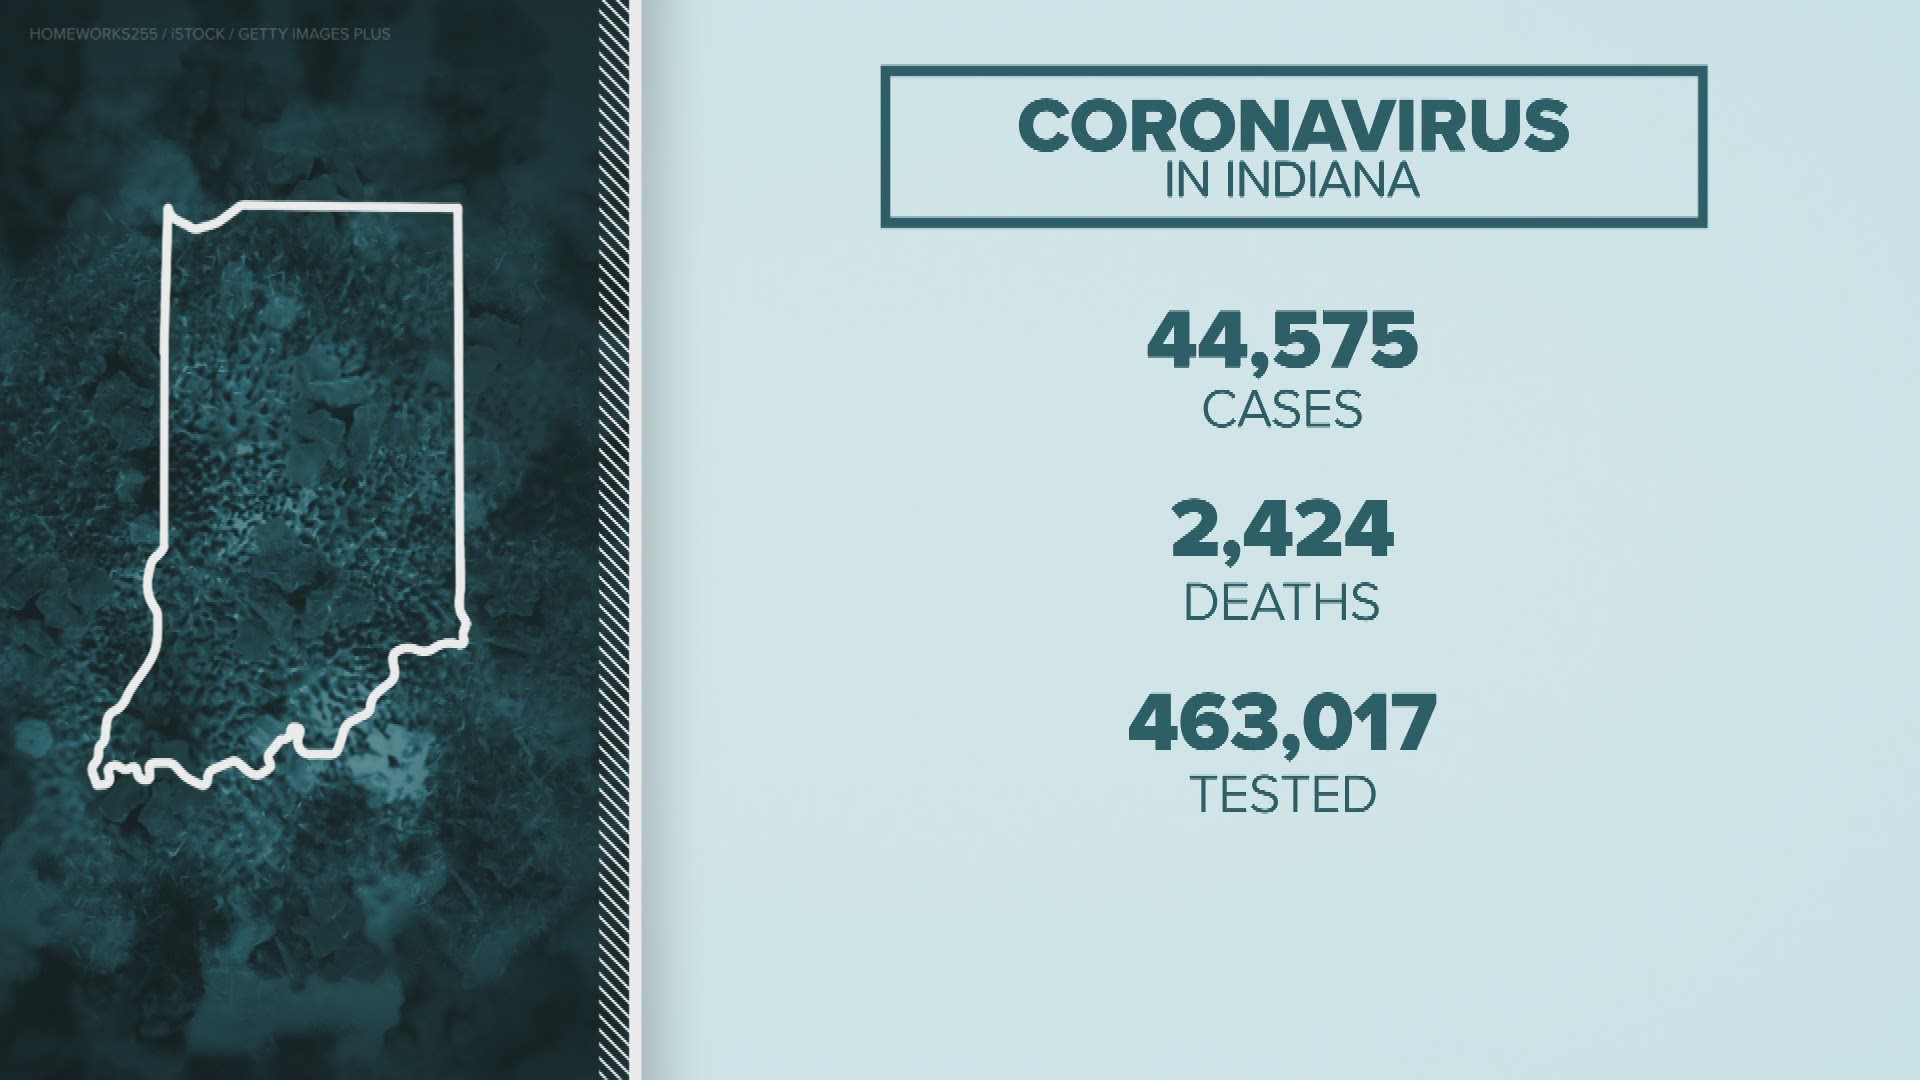 The state health department released its latest numbers and for the third day in a row, we had around 500 new cases of COVID-19.